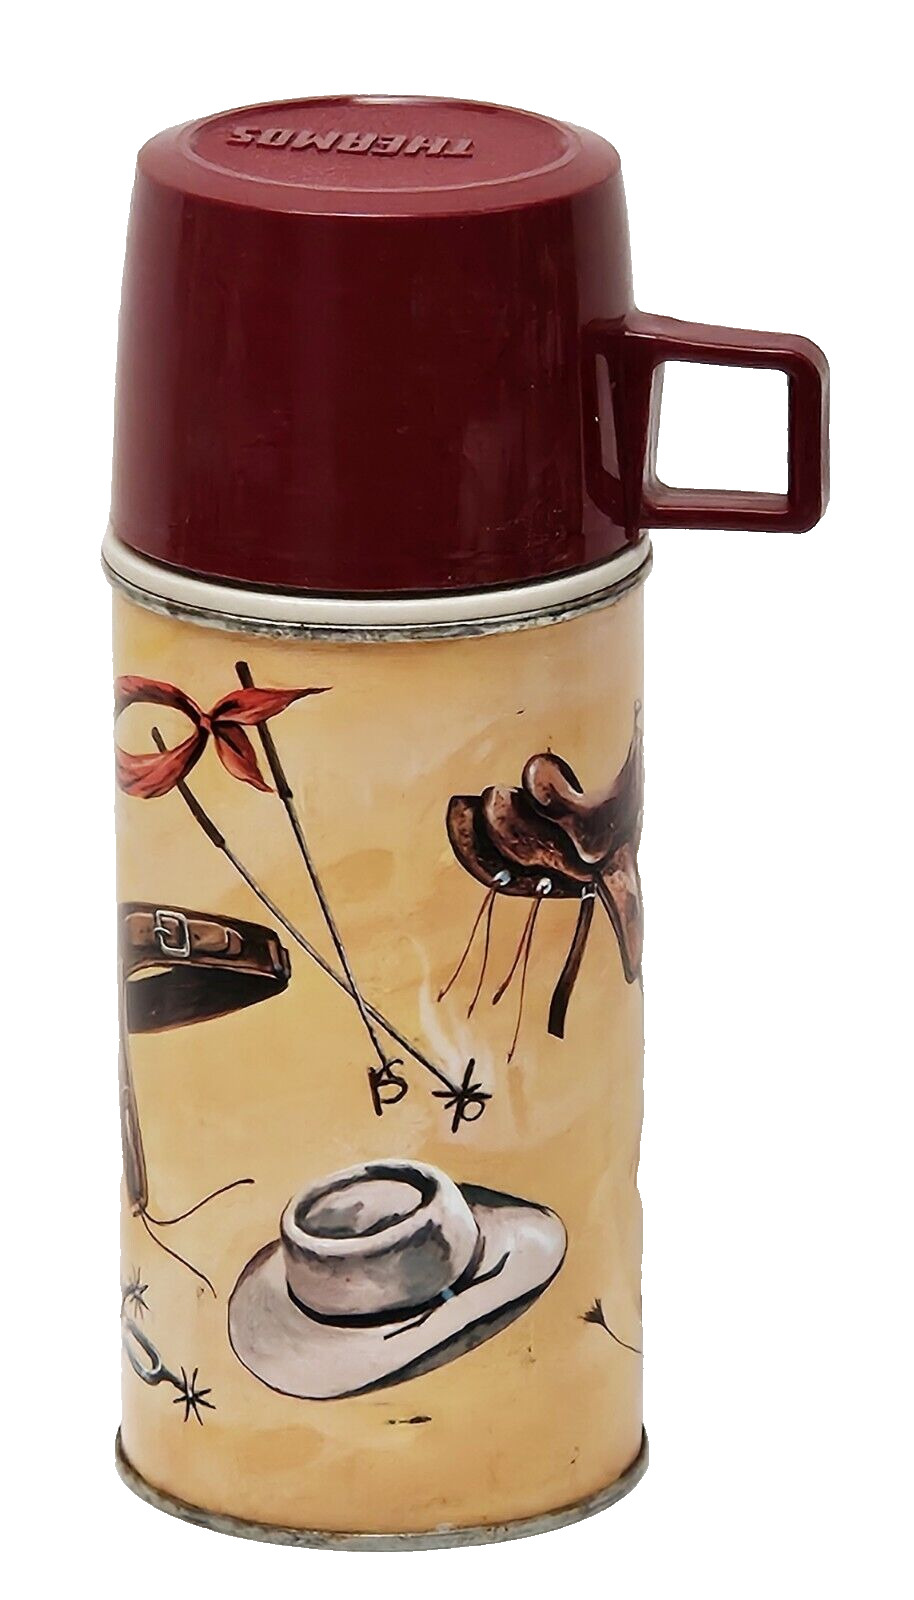 1961 American Thermos King-Seeley Western Cowboy Cowgirl Theme TV Show